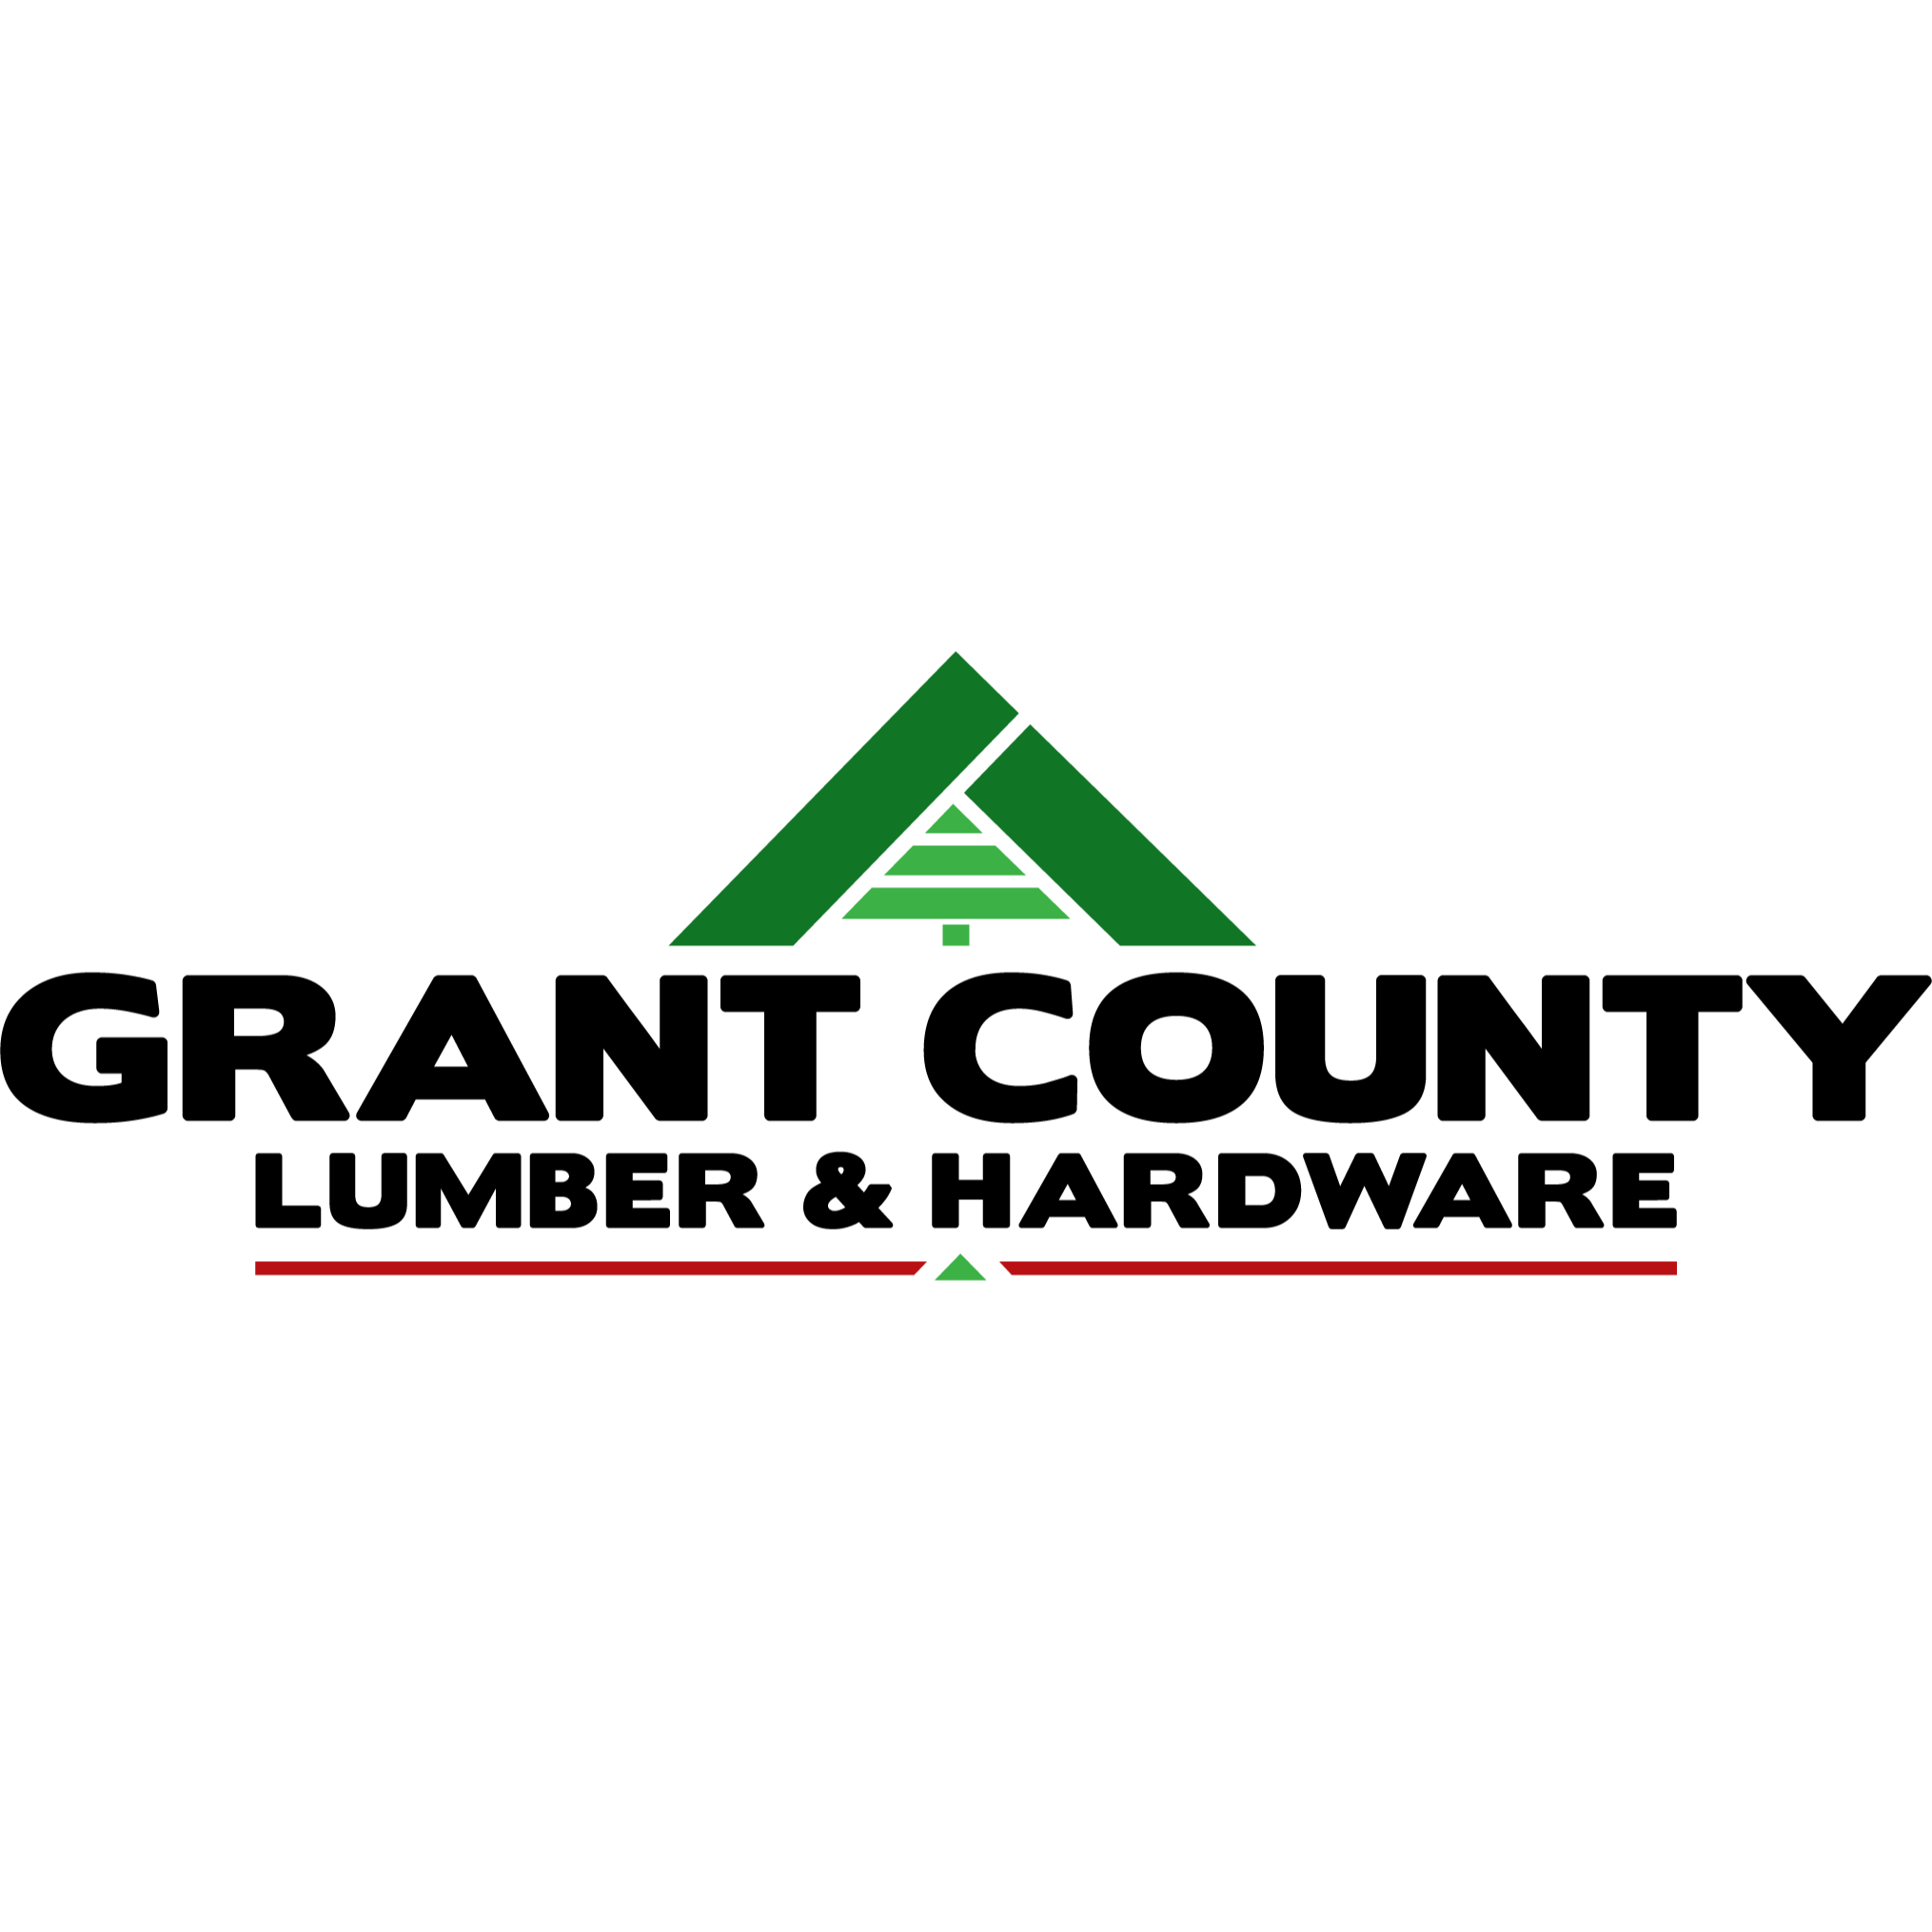 Grant County Lumber and Hardware - Elbow Lake, MN 56531 - (218)685-5321 | ShowMeLocal.com